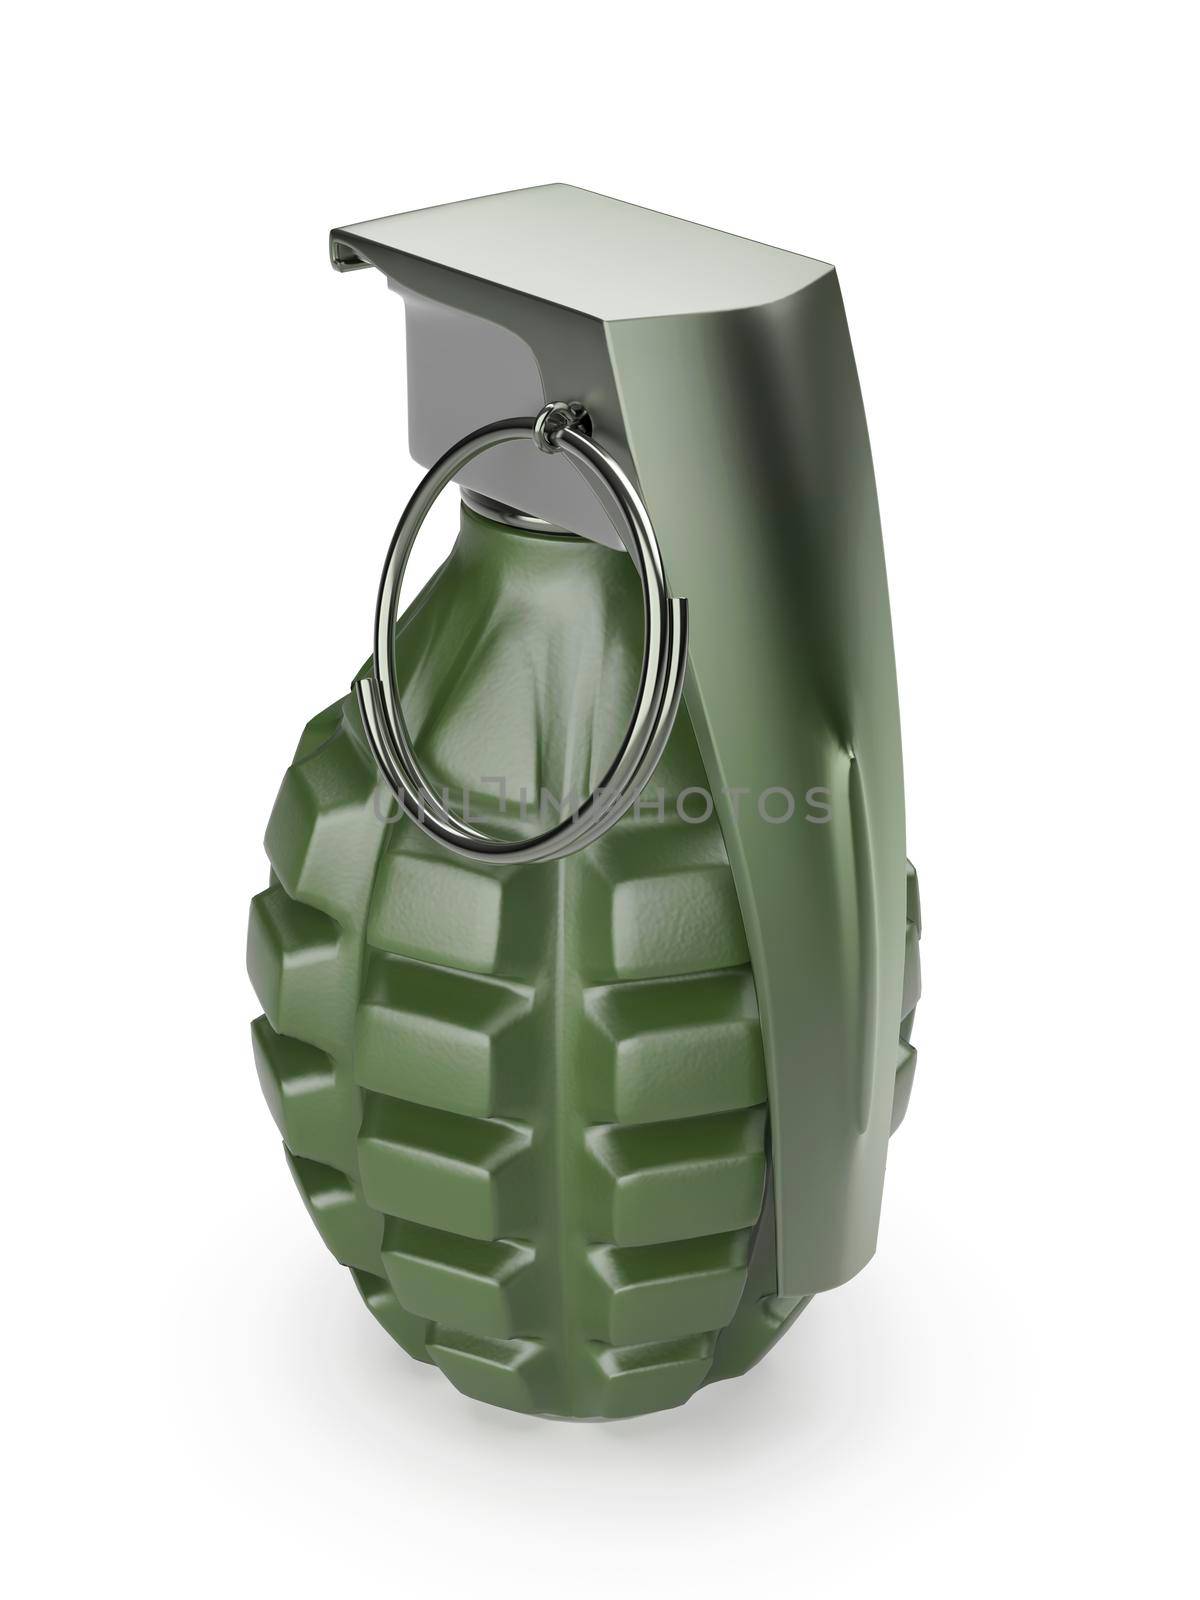 Fragmentation hand grenade by magraphics